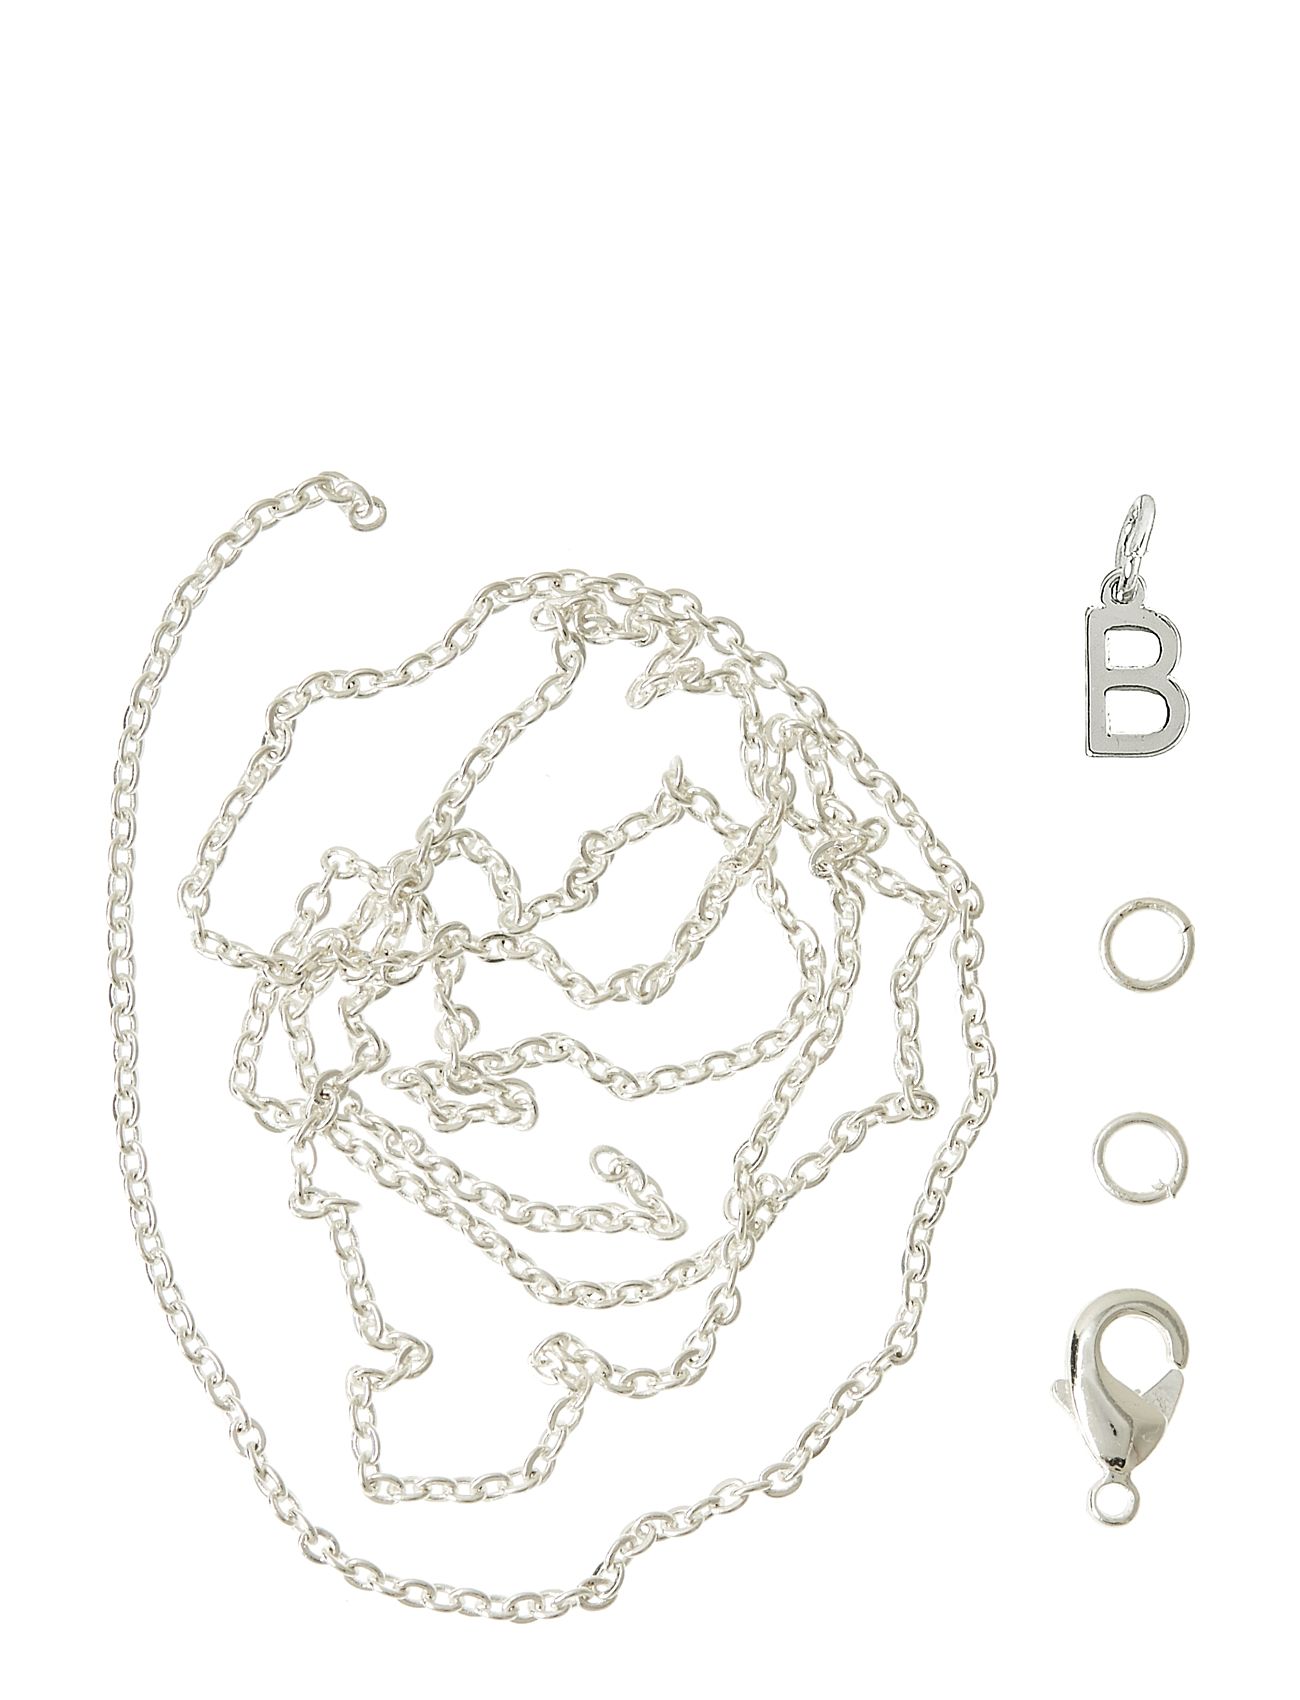 Letter B Sp With O-Ring, Chain And Clasp Toys Creativity Drawing & Crafts Craft Jewellery & Accessories Silver Me & My Box